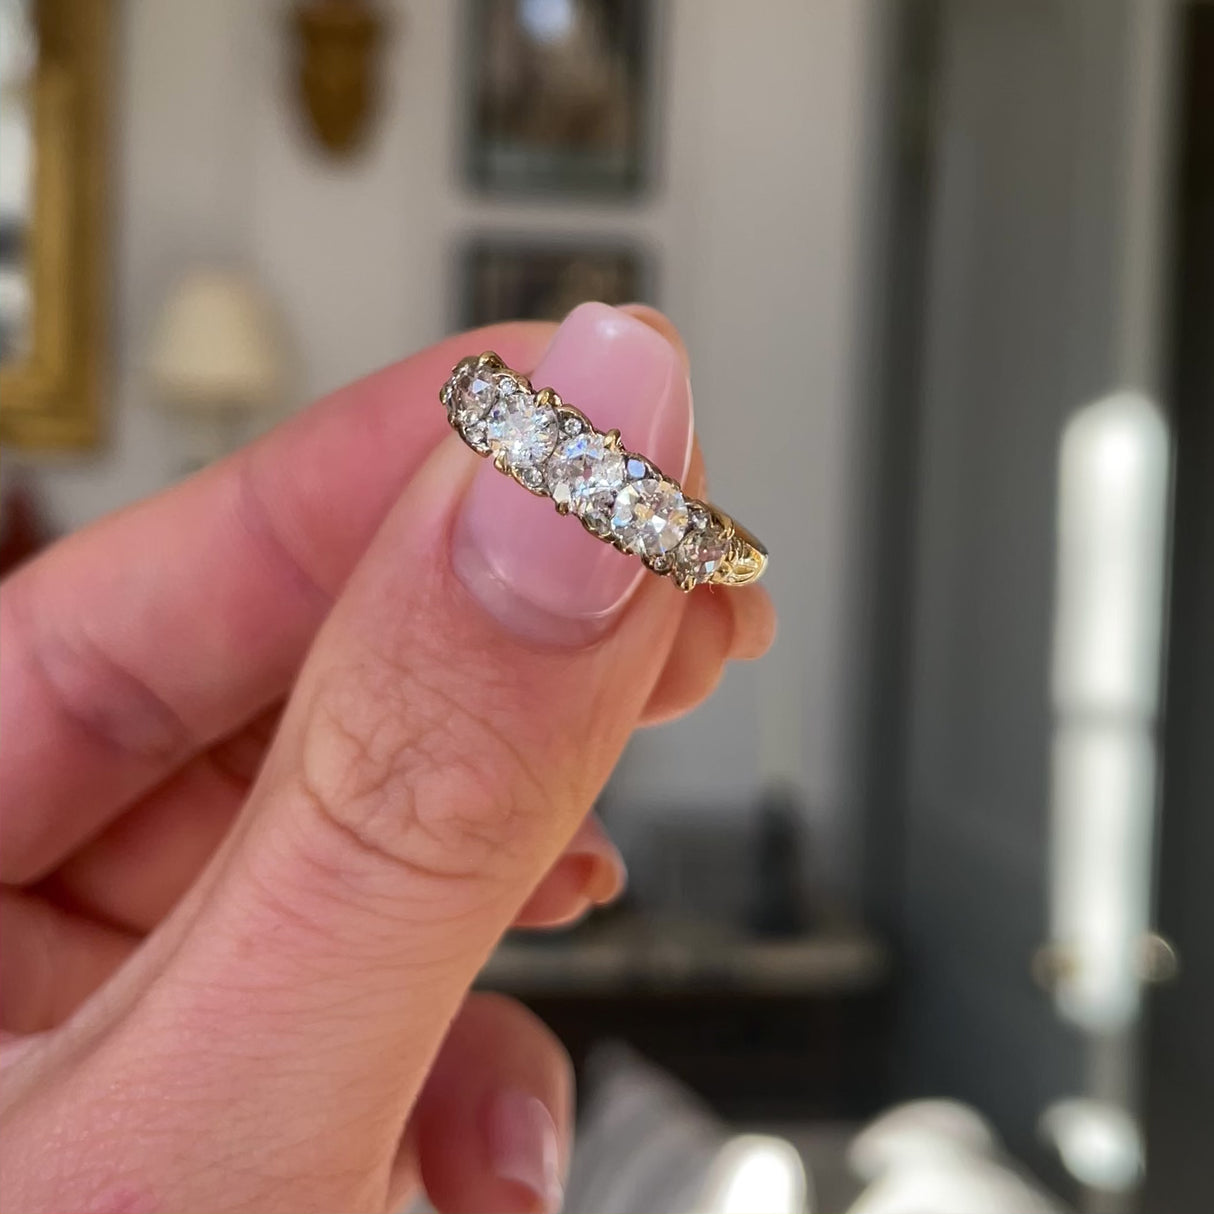 Antique five-stone diamond engagement ring, held in fingers and rotated to give perspective.